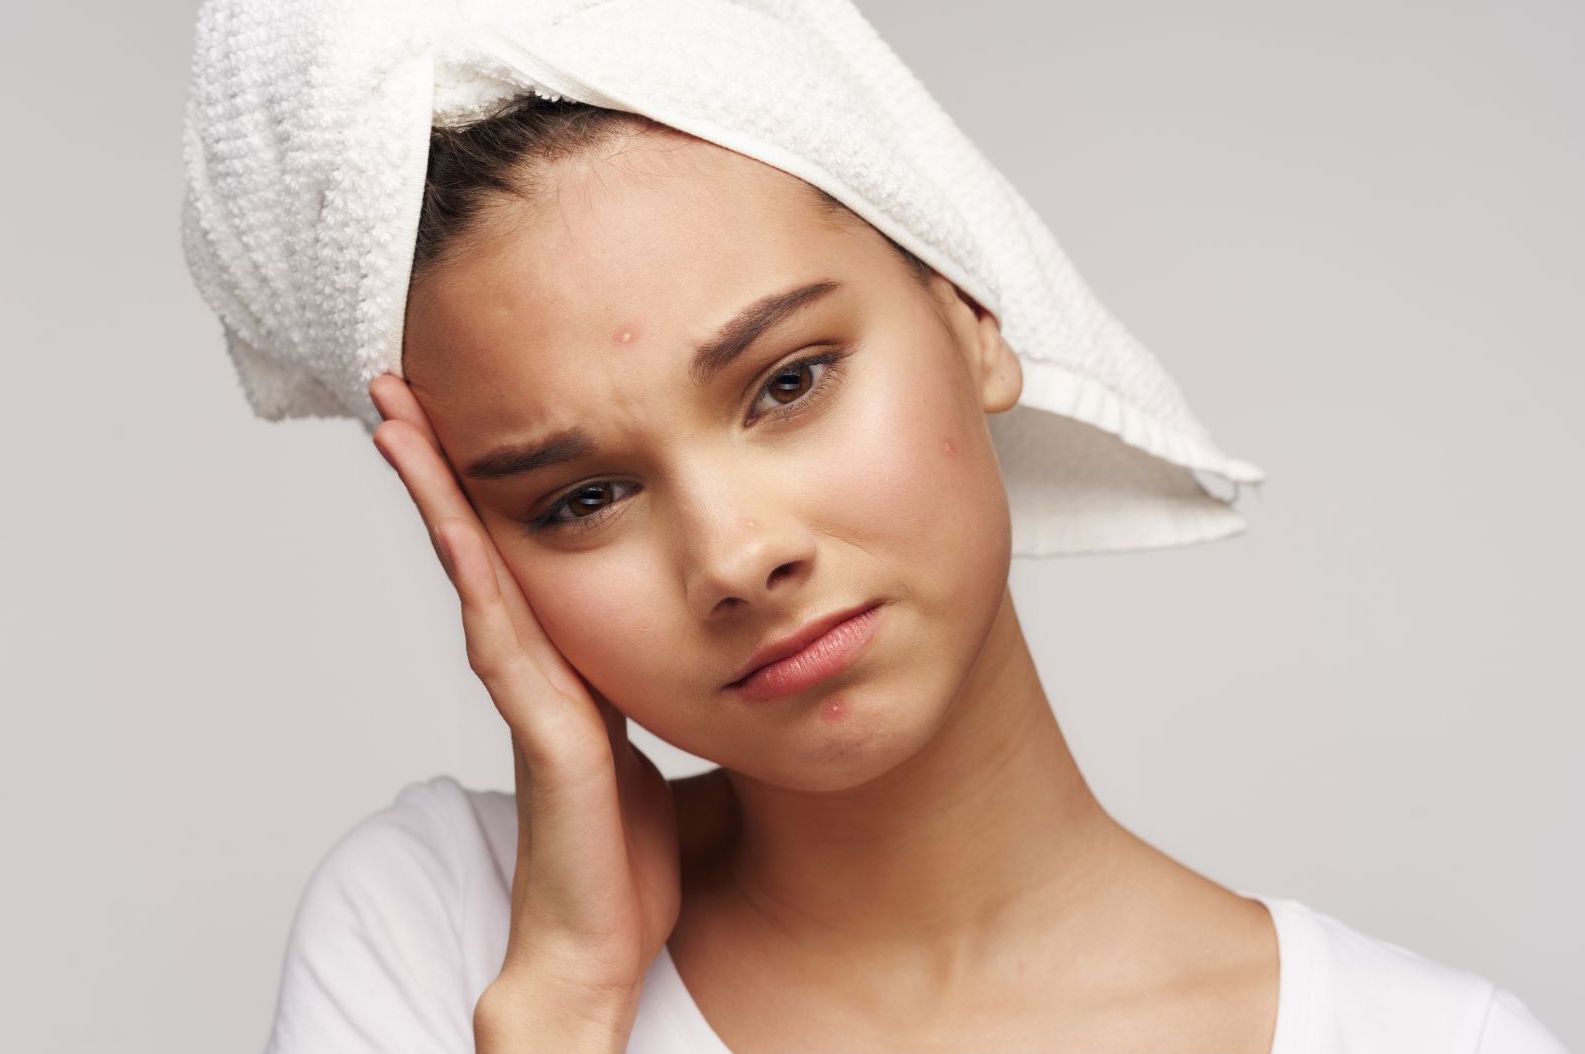 How To Get Rid of Pimples on Forehead Effectively